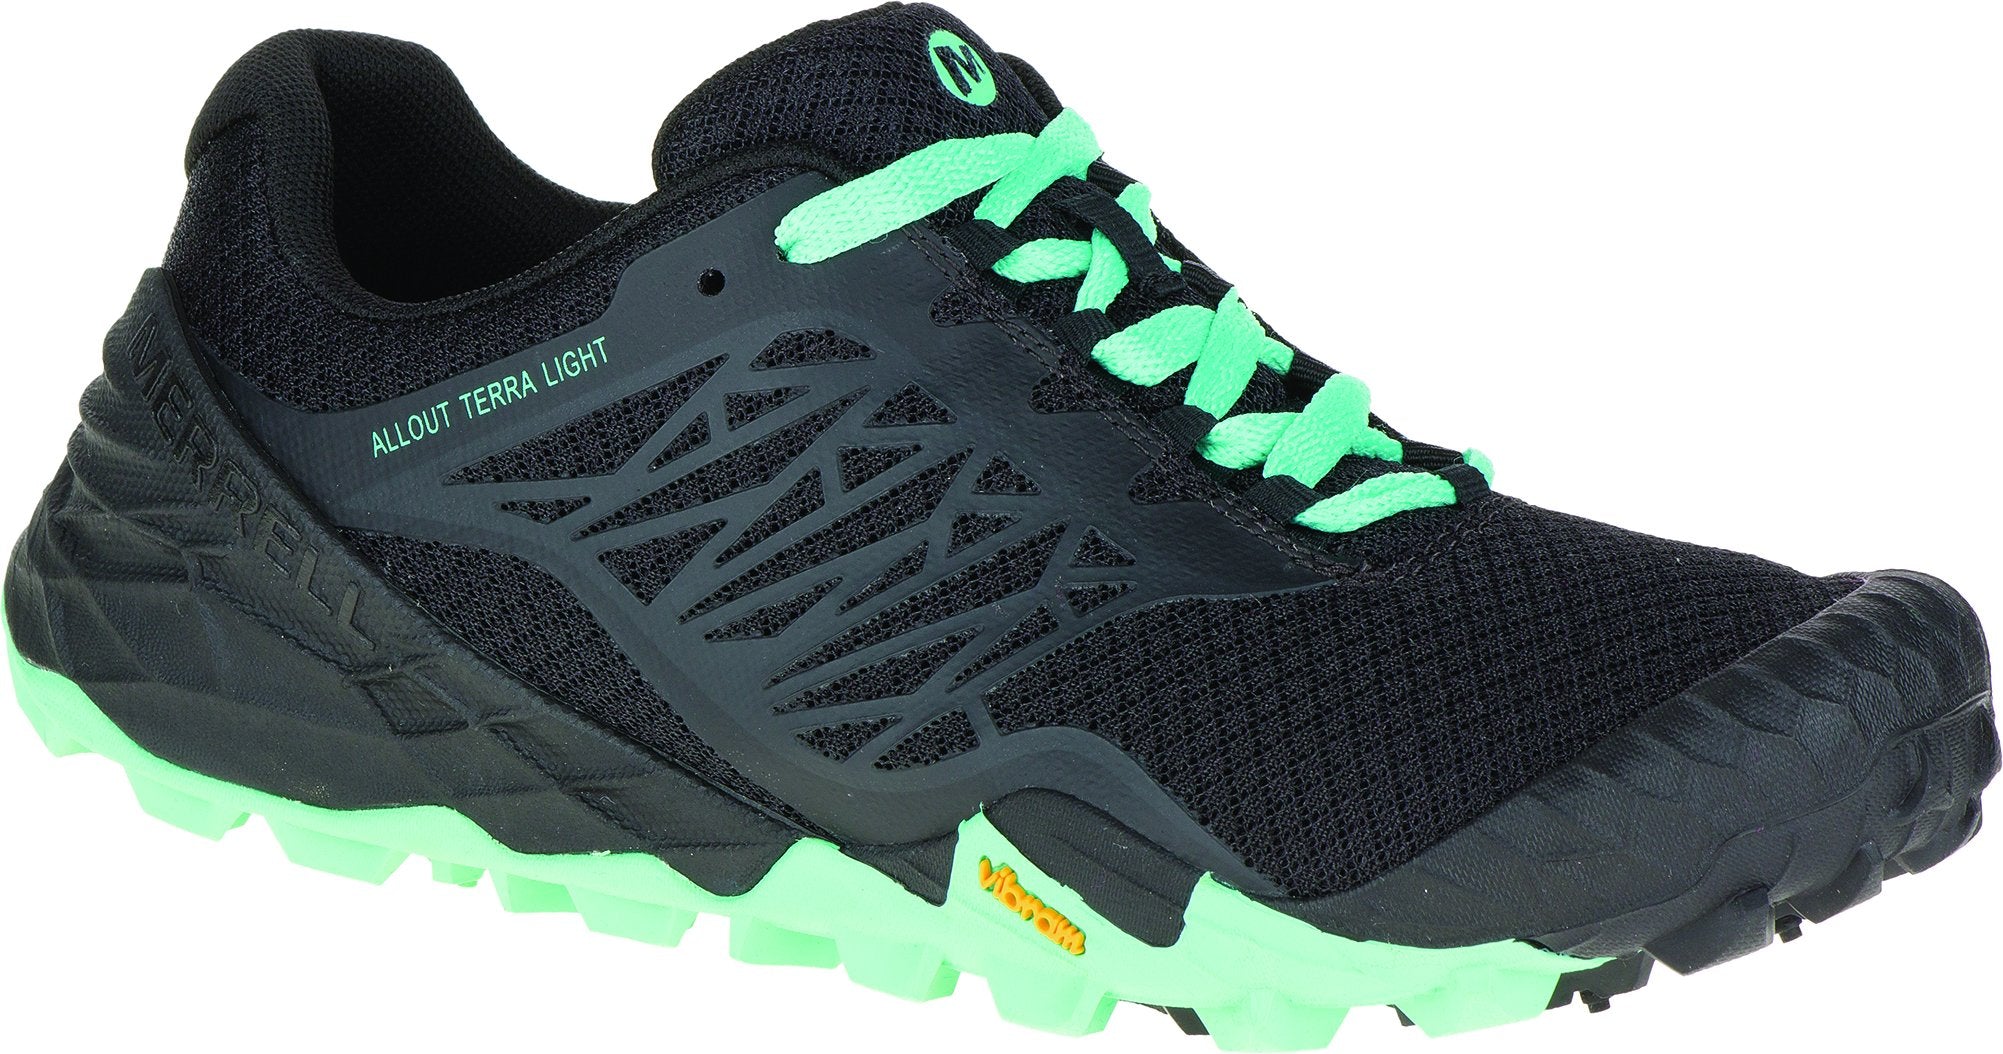 Merrell All Out Terra Light Womens Running Shoes - Stockpoint Apparel Outlet